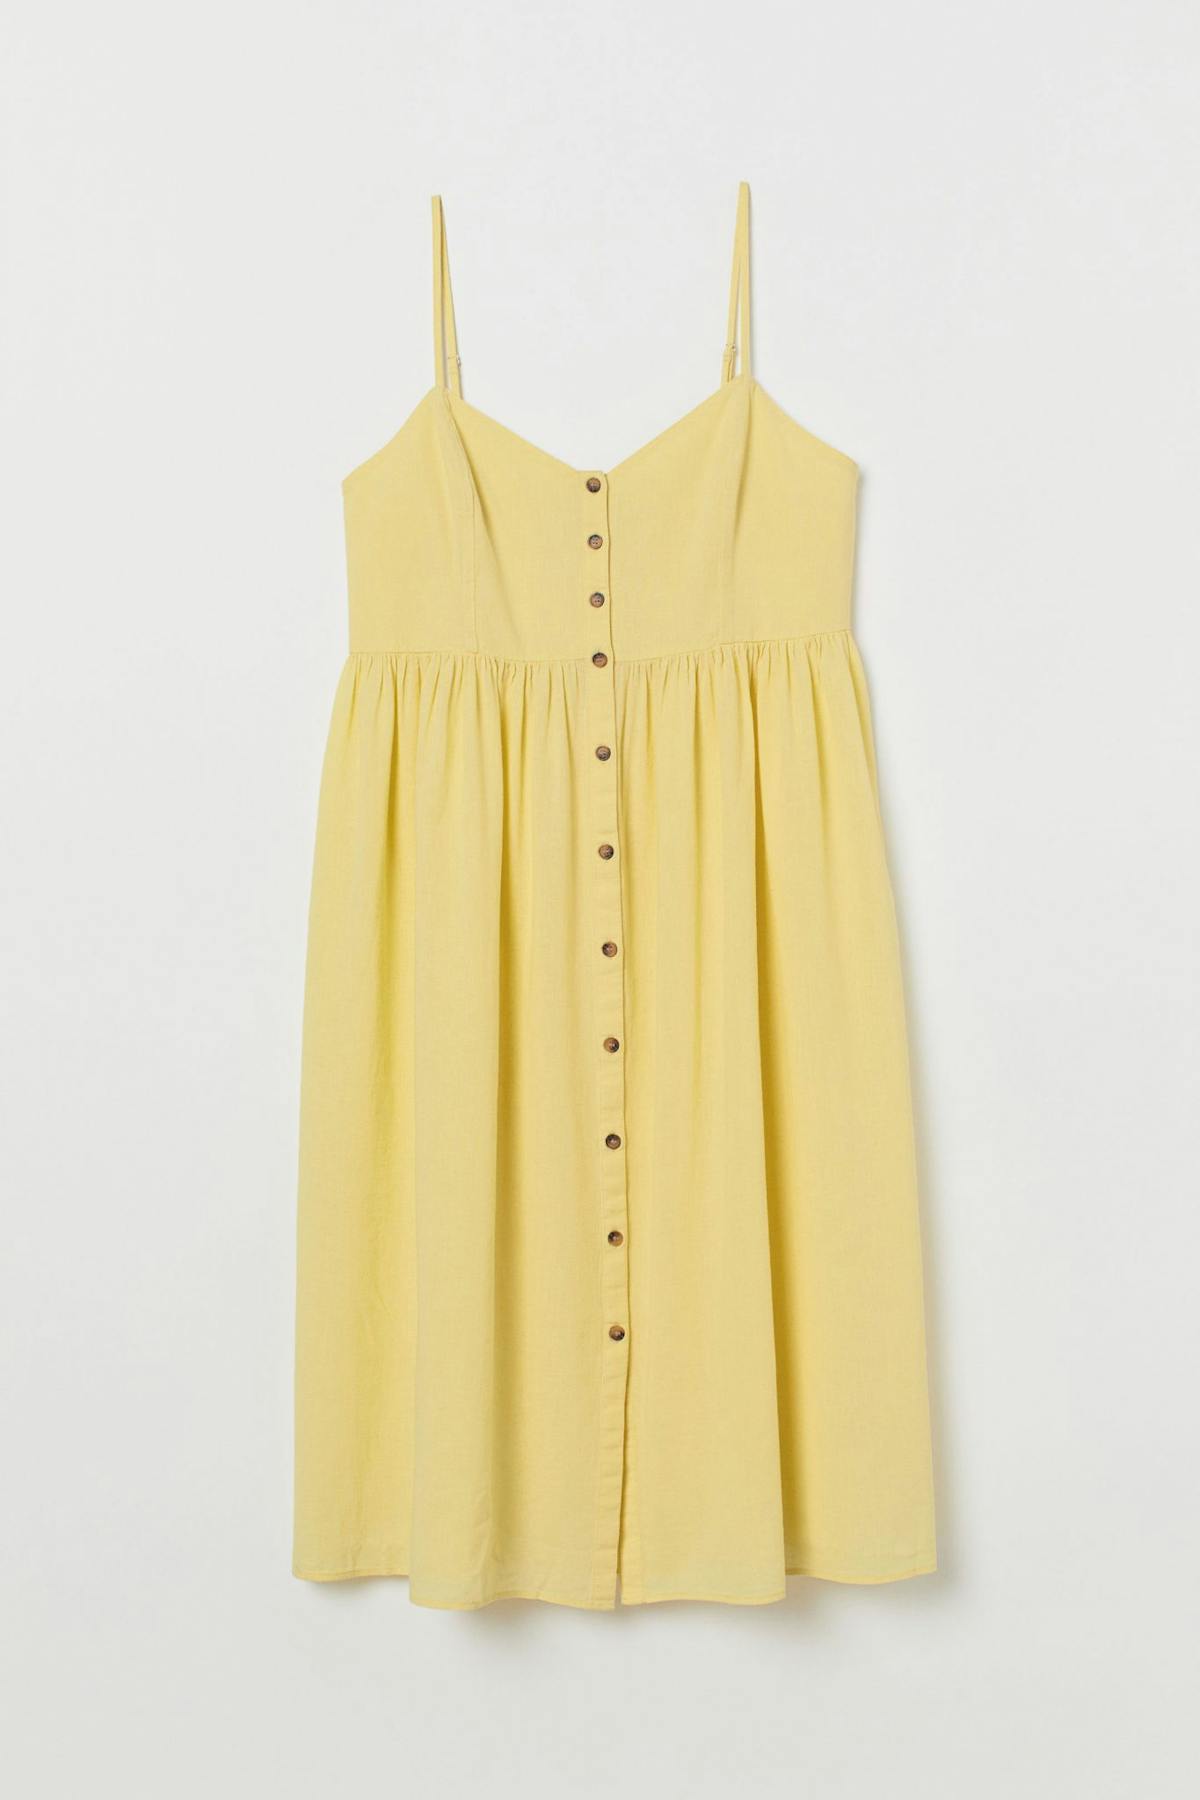 10 yellow dresses for summer